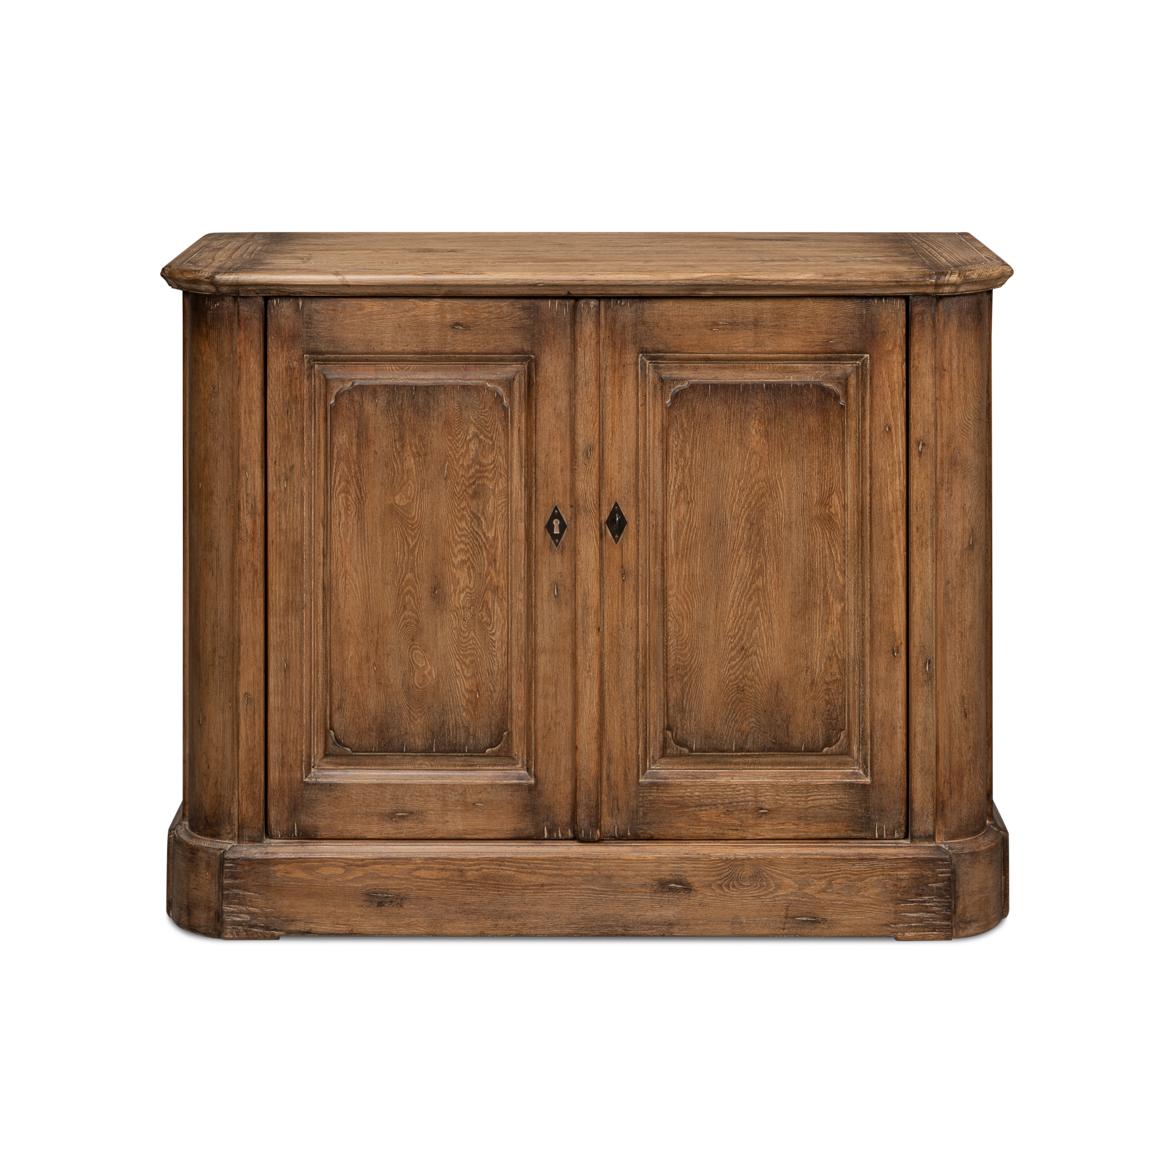 Reminiscent of a storied European past, this exquisite piece is crafted from reclaimed pine, it showcases a graceful antiqued warm brown finish, lending it a serene country style with rustic elegance.

Perfectly sized at 47